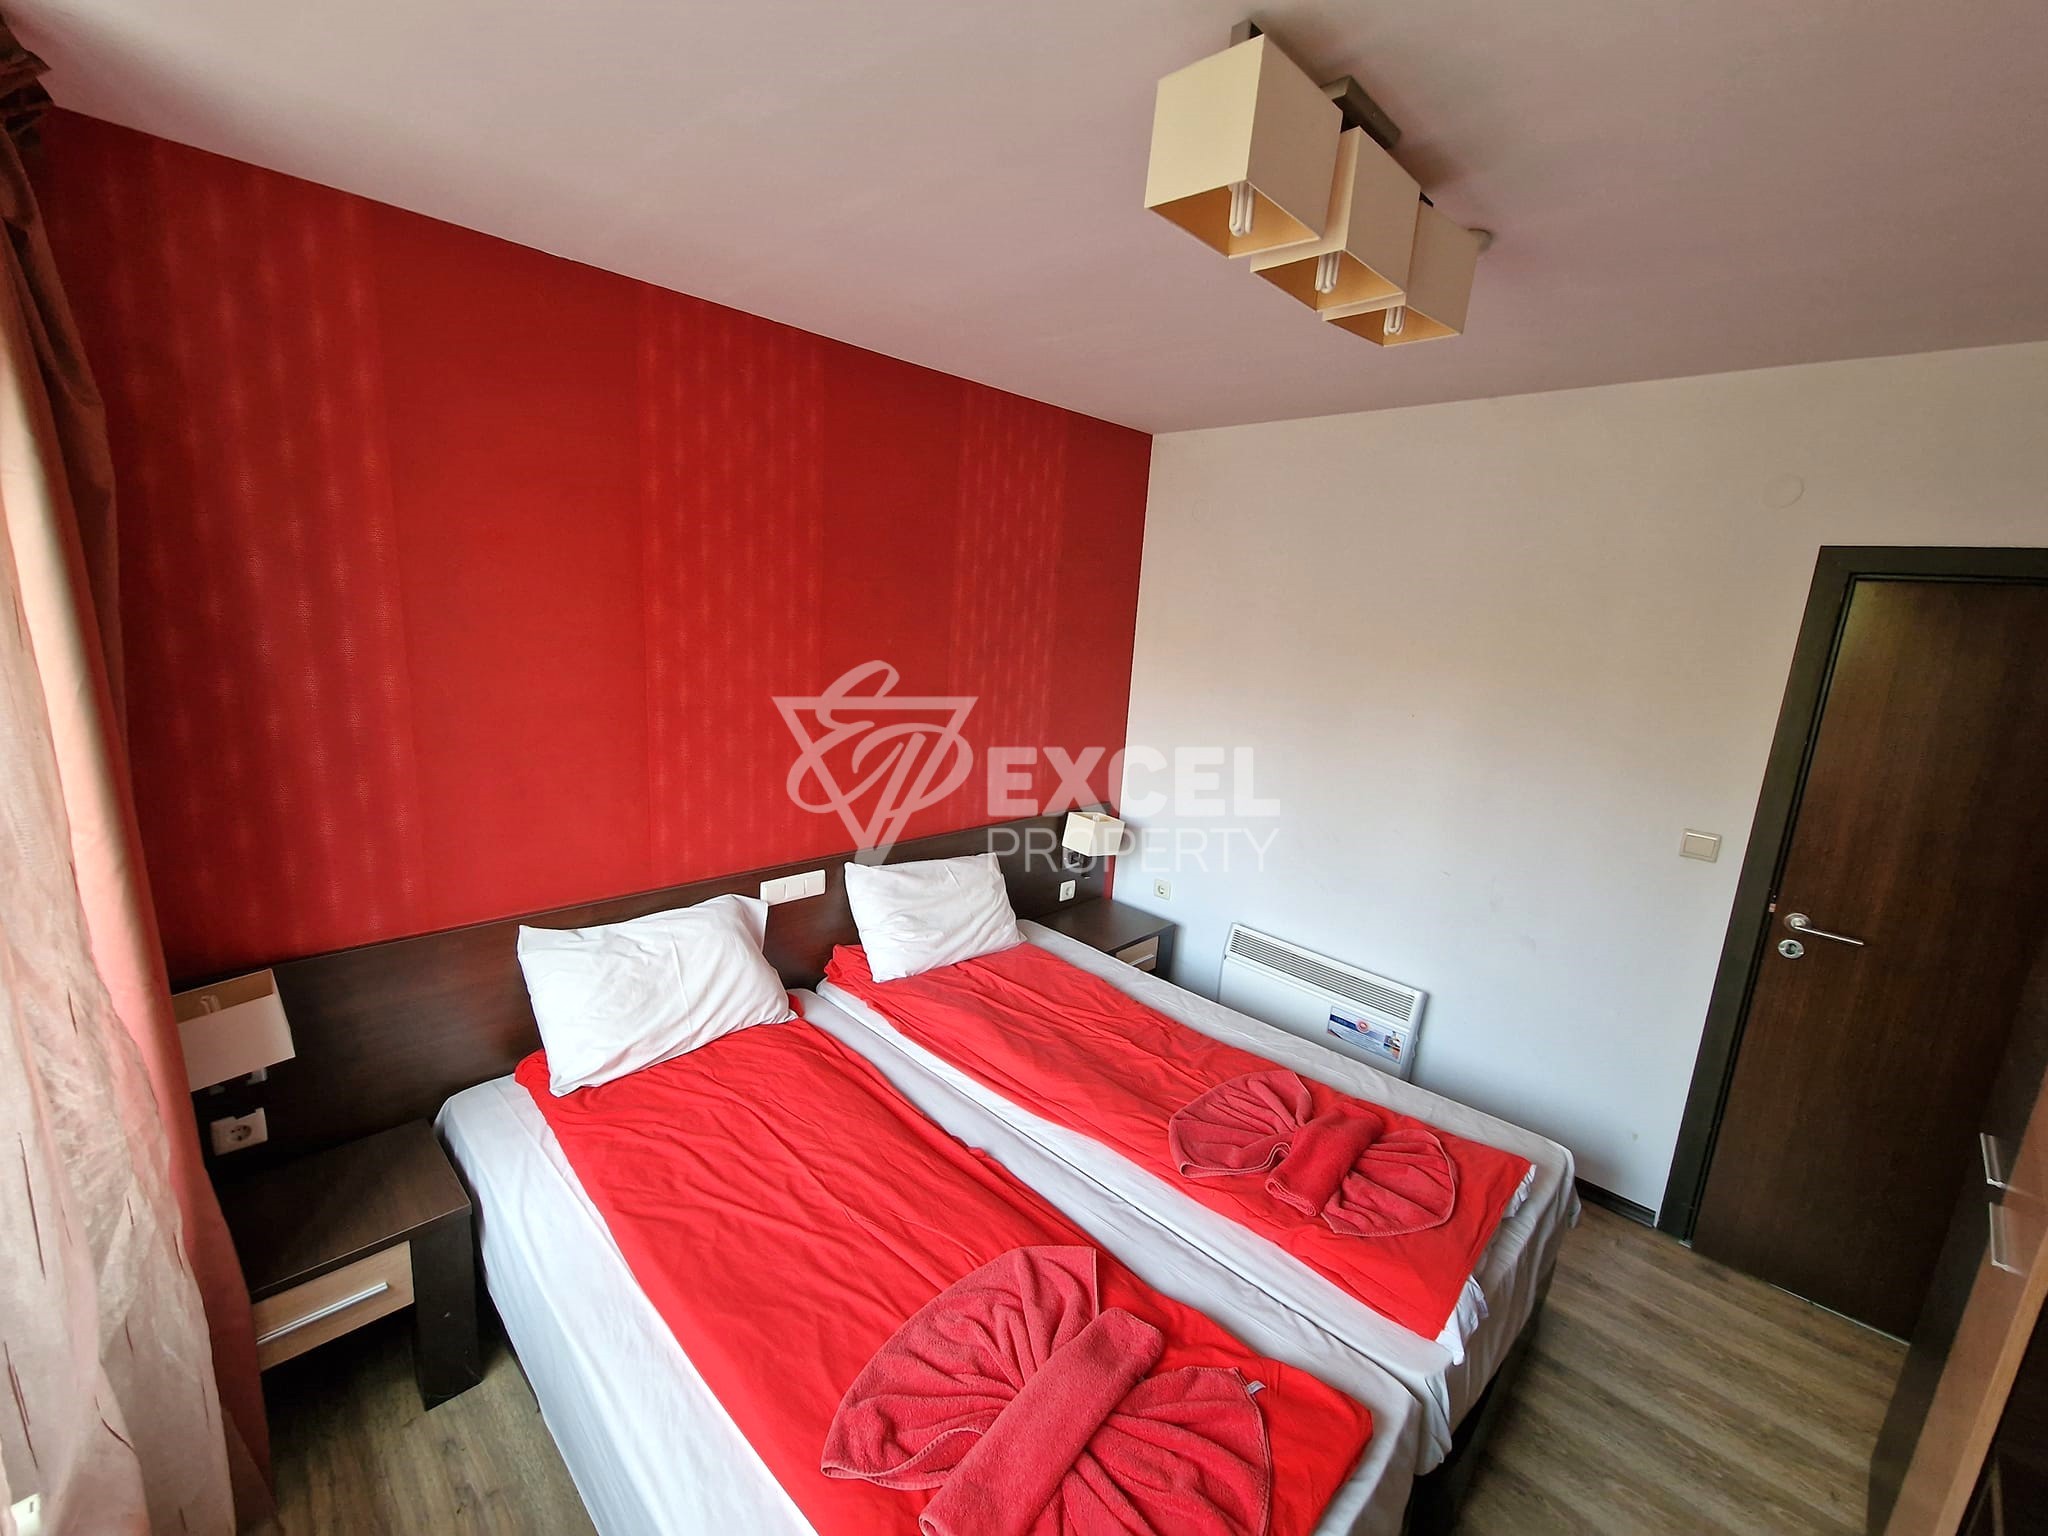 One-bedroom apartment between Bansko and the village of Banya